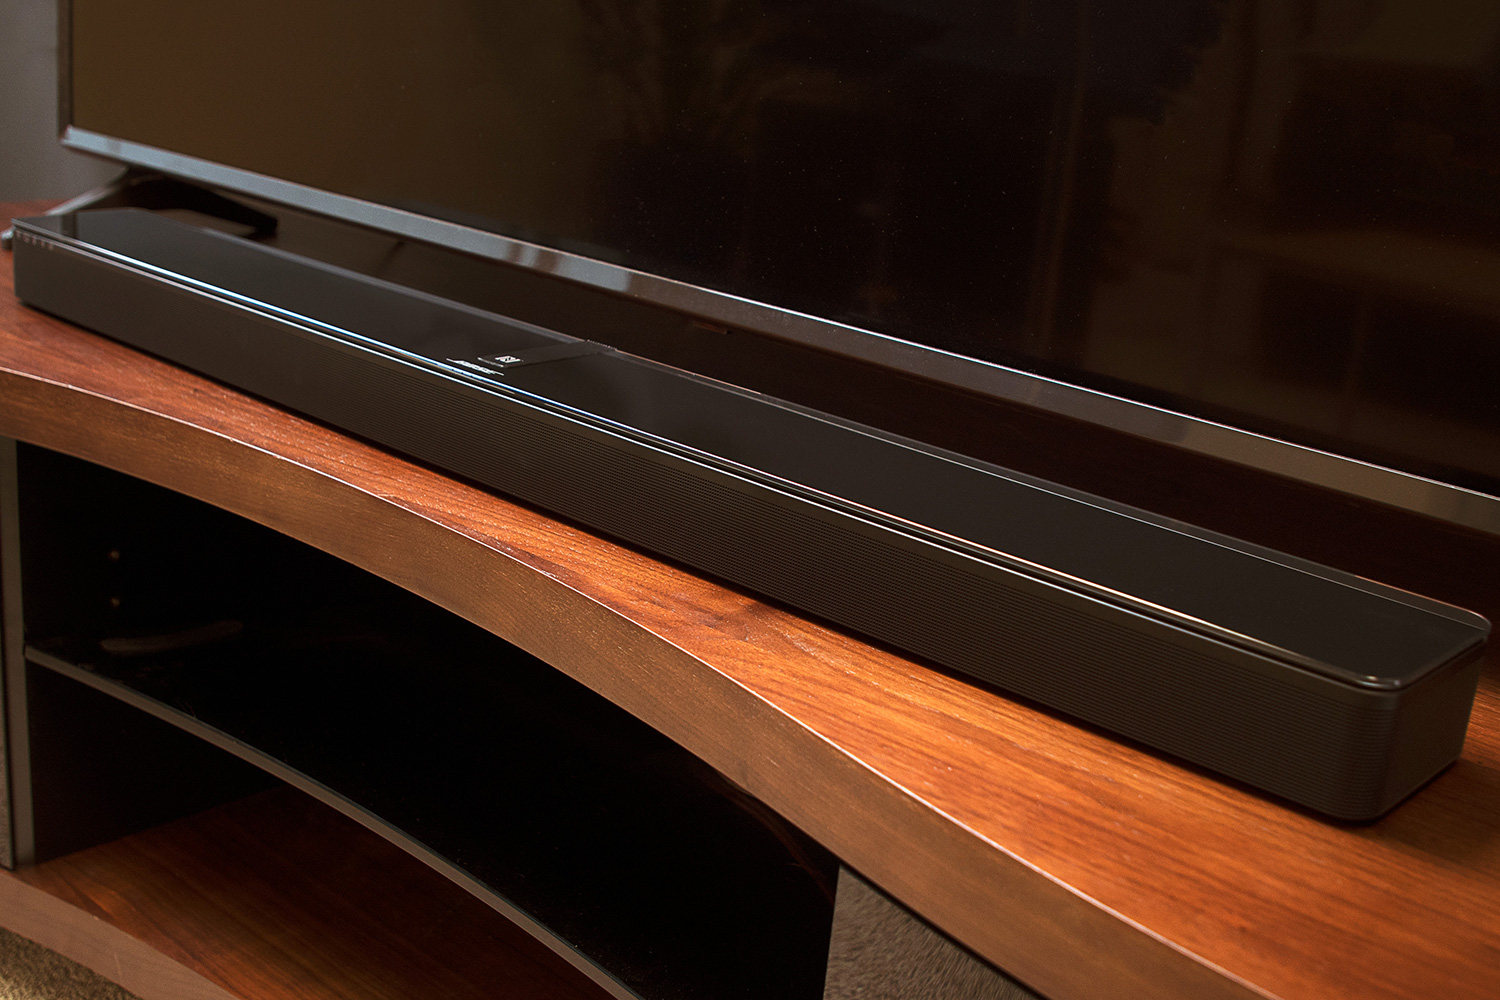 Bose SoundTouch and 300 bass module review | Trends